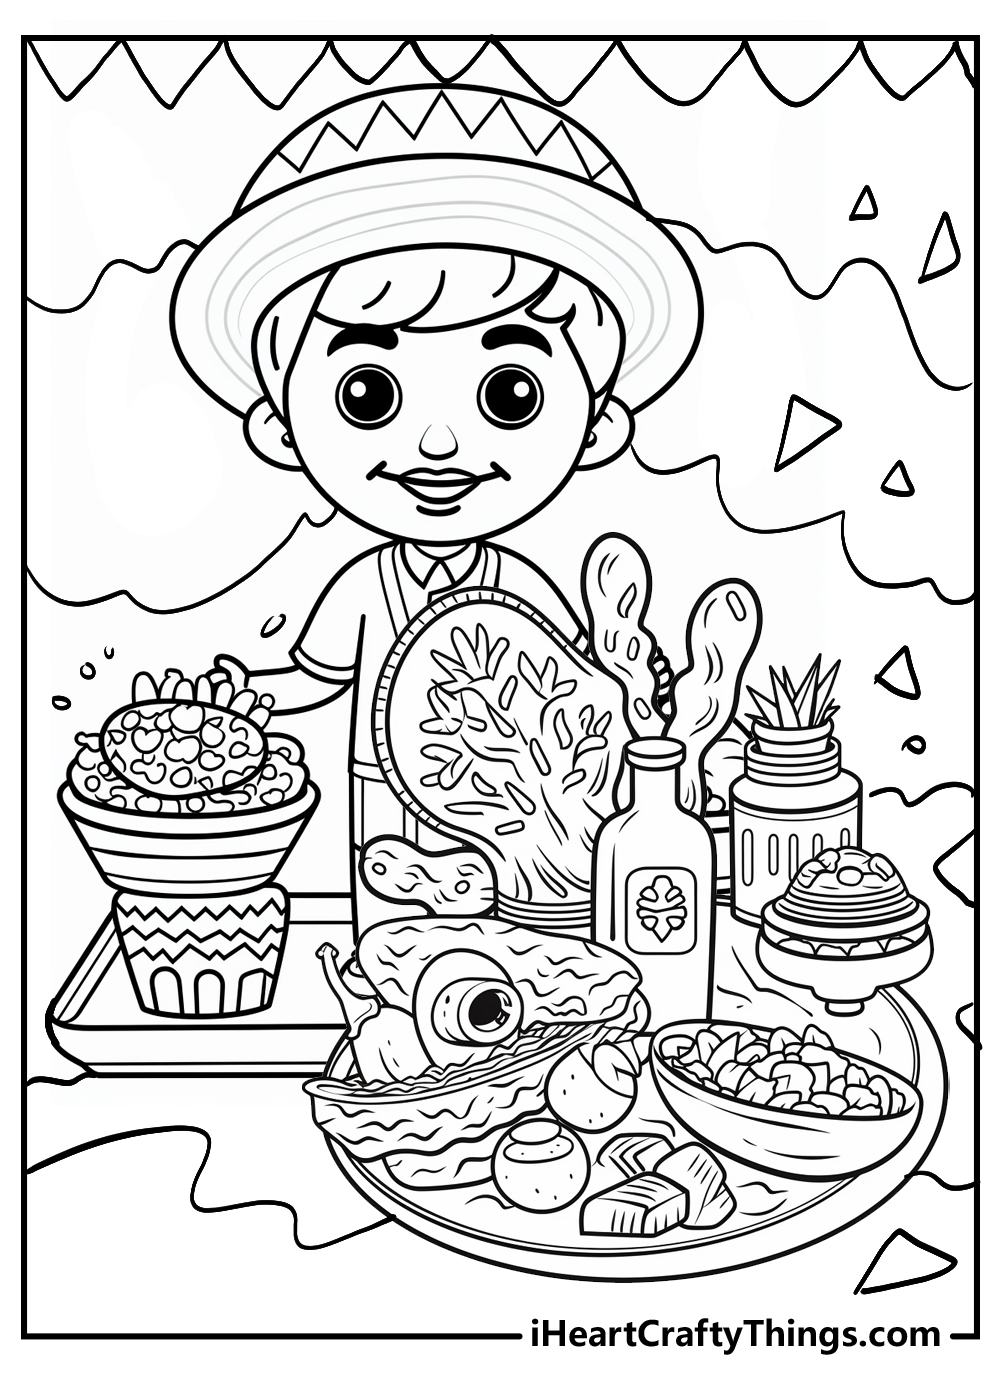 cinco de mayo coloring pages for adults